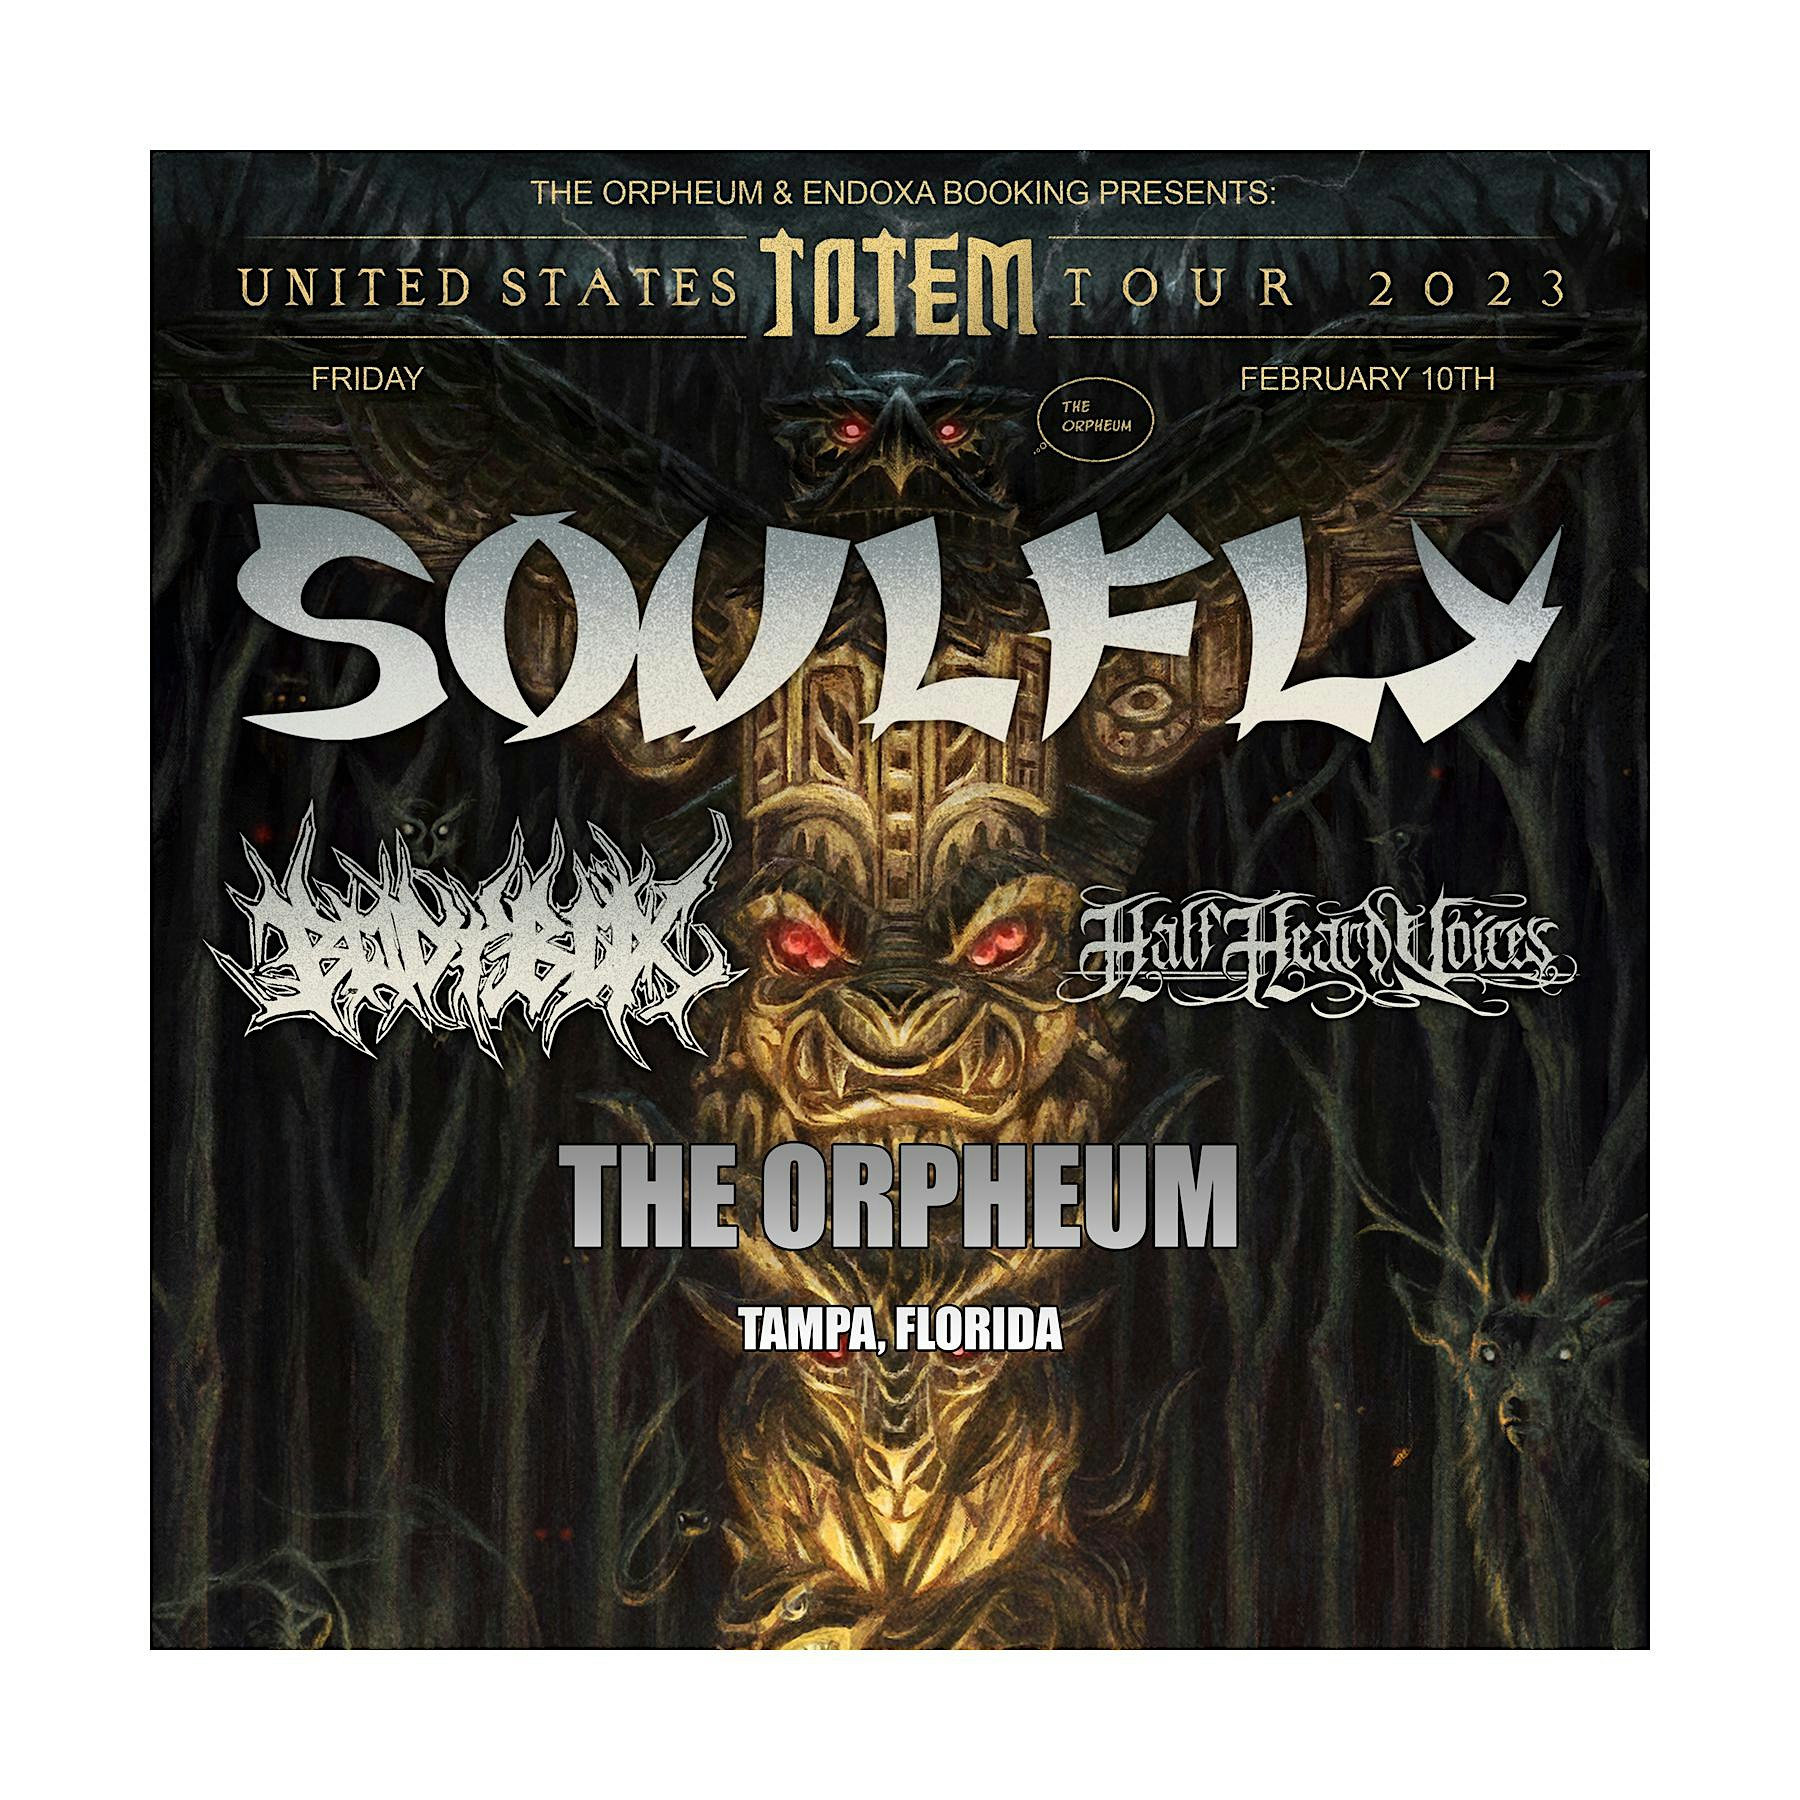 Soulfly, Bodybox, and Half Heard Voices in Tampa at the Orpheum